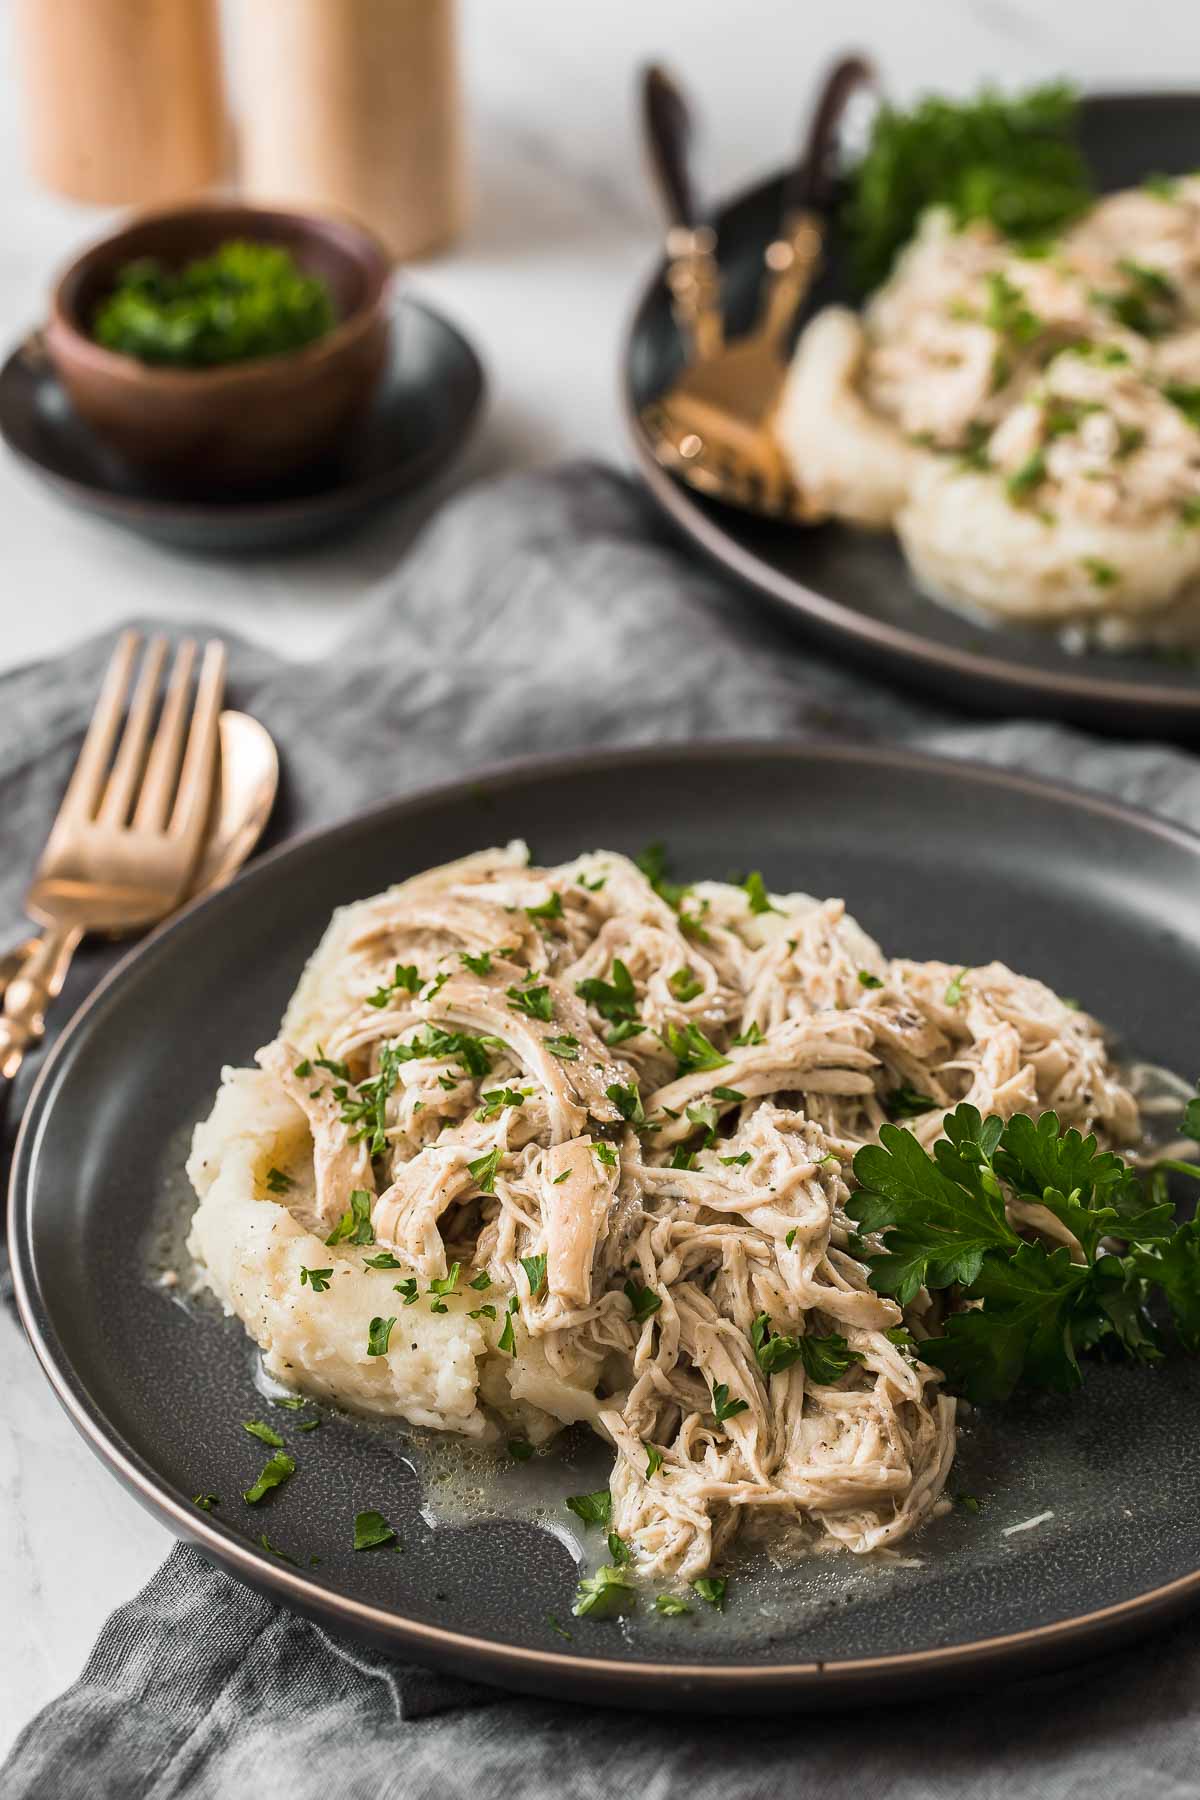 Two plates of shredded chicken over mashed potatoes.